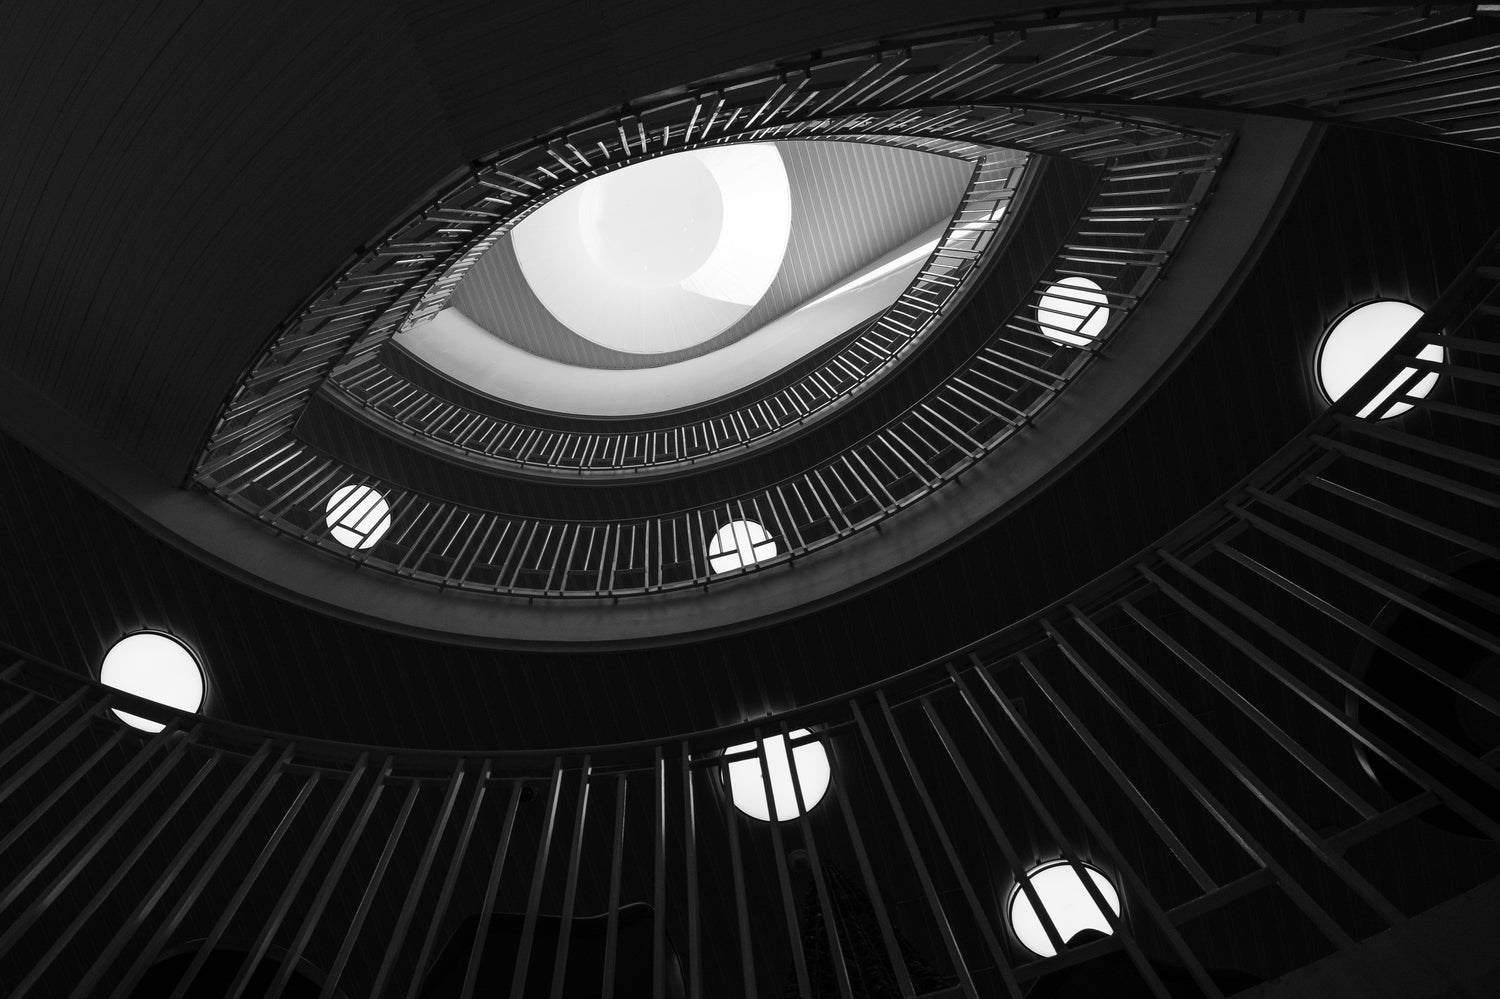 A staircase in Helsinki, cast in black-and-white style, reminiscent of an eye. The eye is connected to George Orwell because of the fear of secret police that pervades his work, whose watchful eye we all must fear. Photo by Petri Heiskanen on Unsplash.